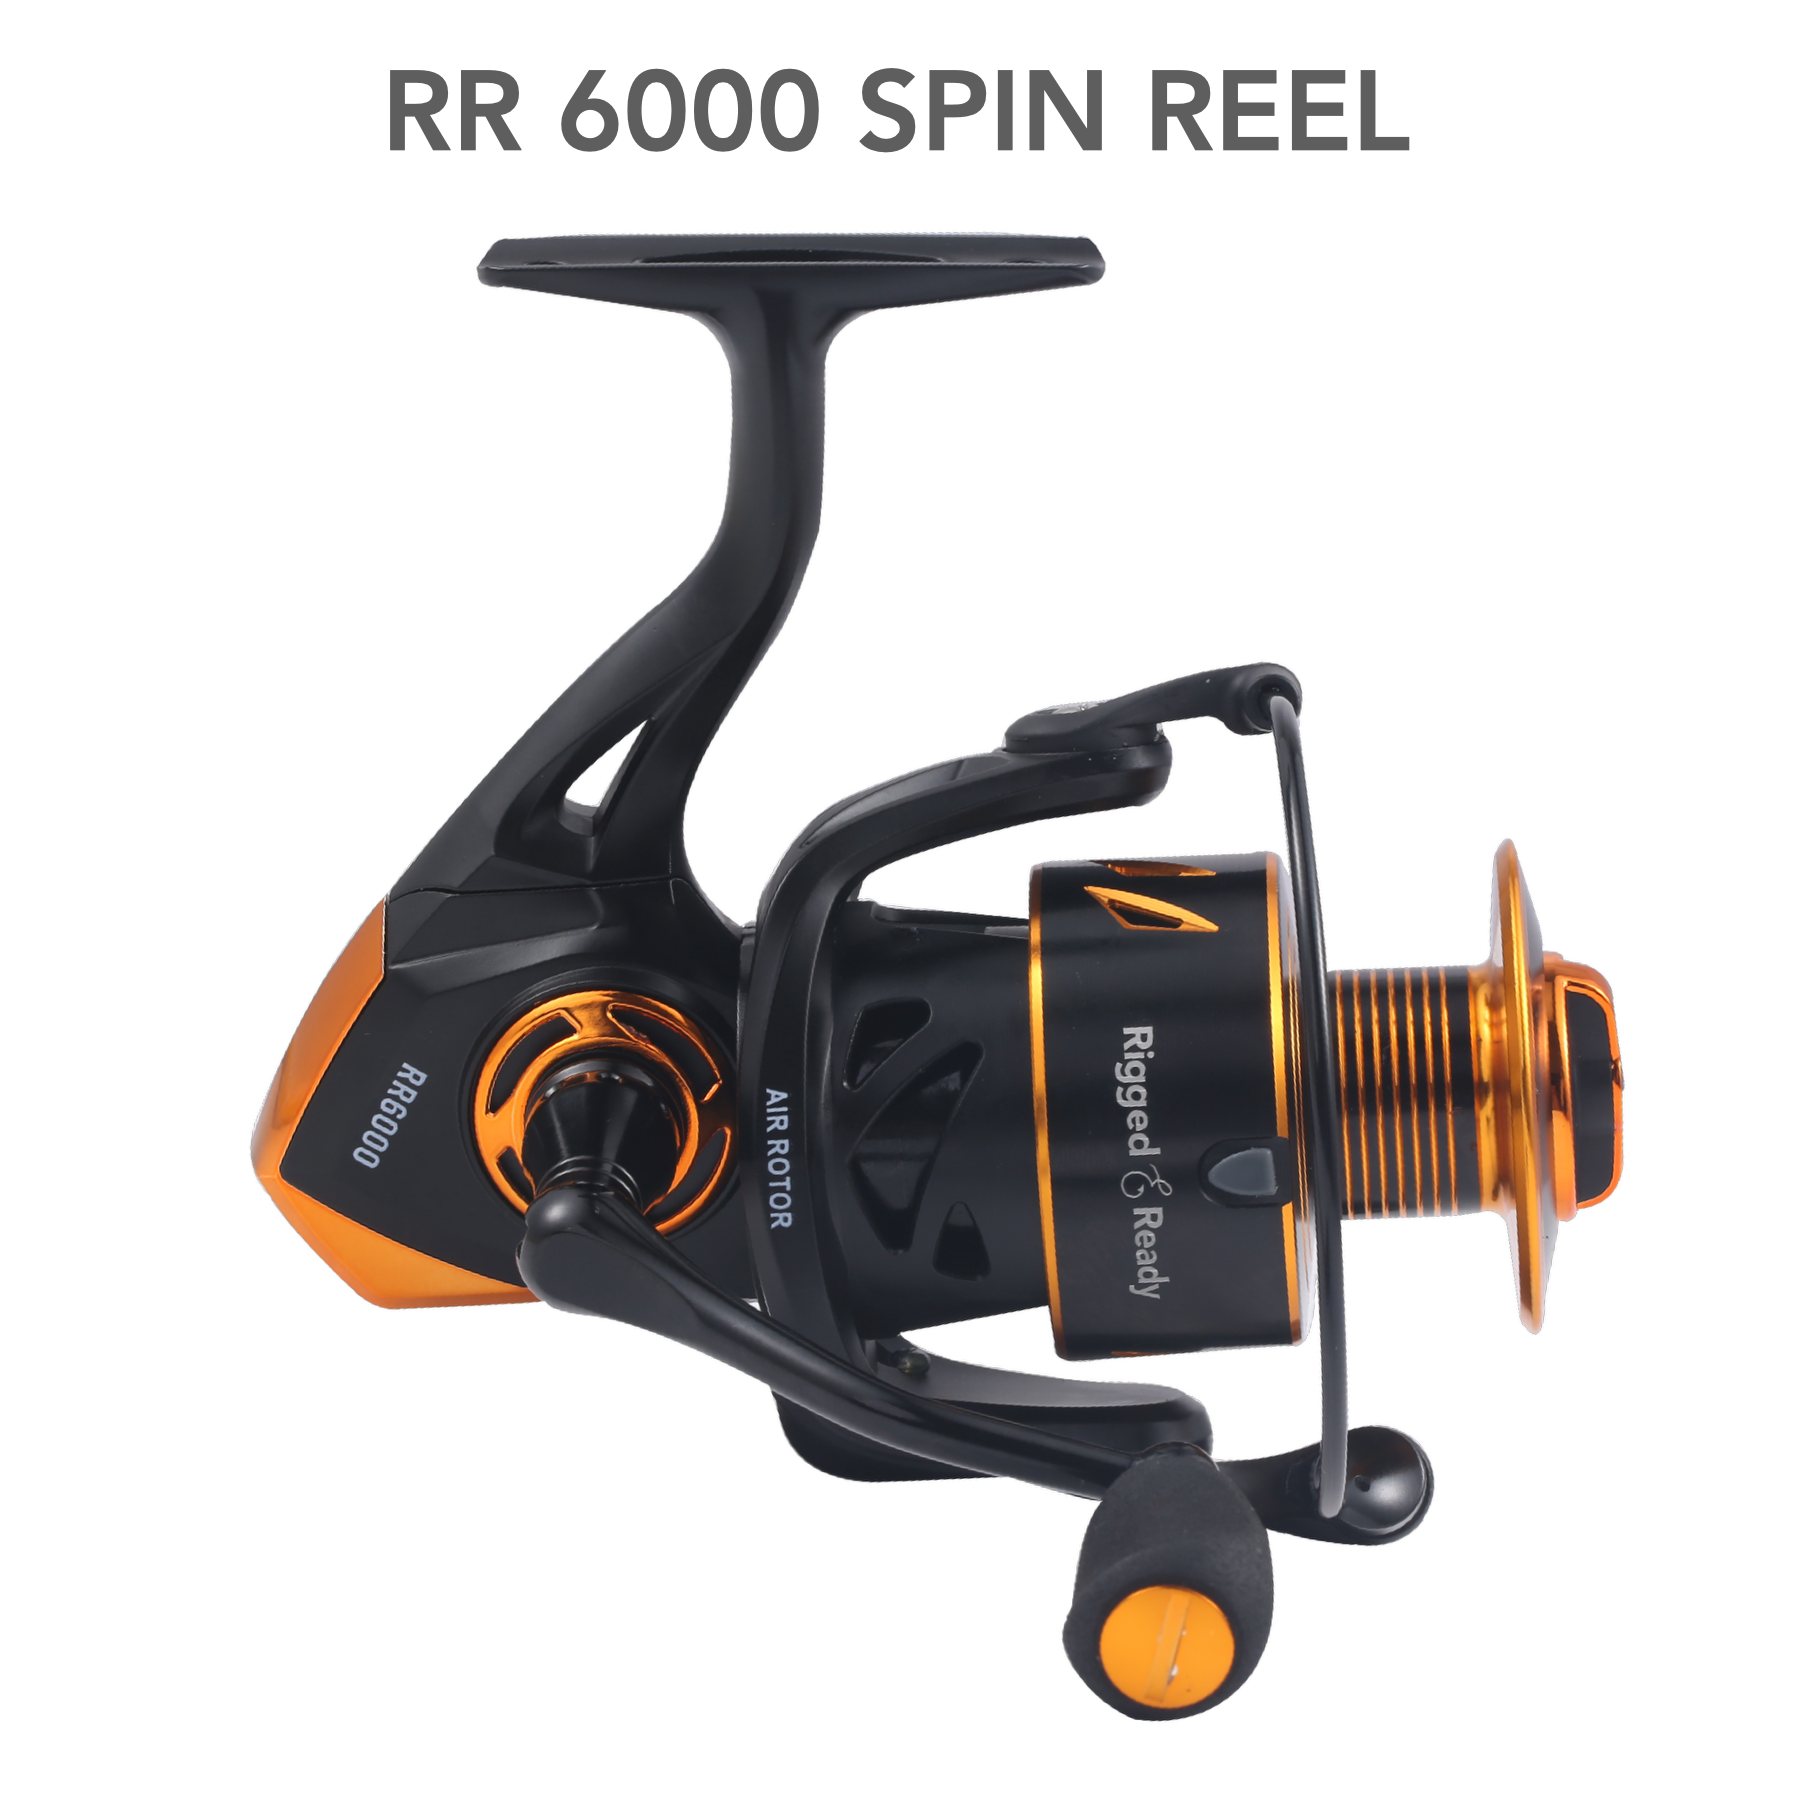 RR 6000 Big Fish Spin Reel. Smooth strong durable salt protecte